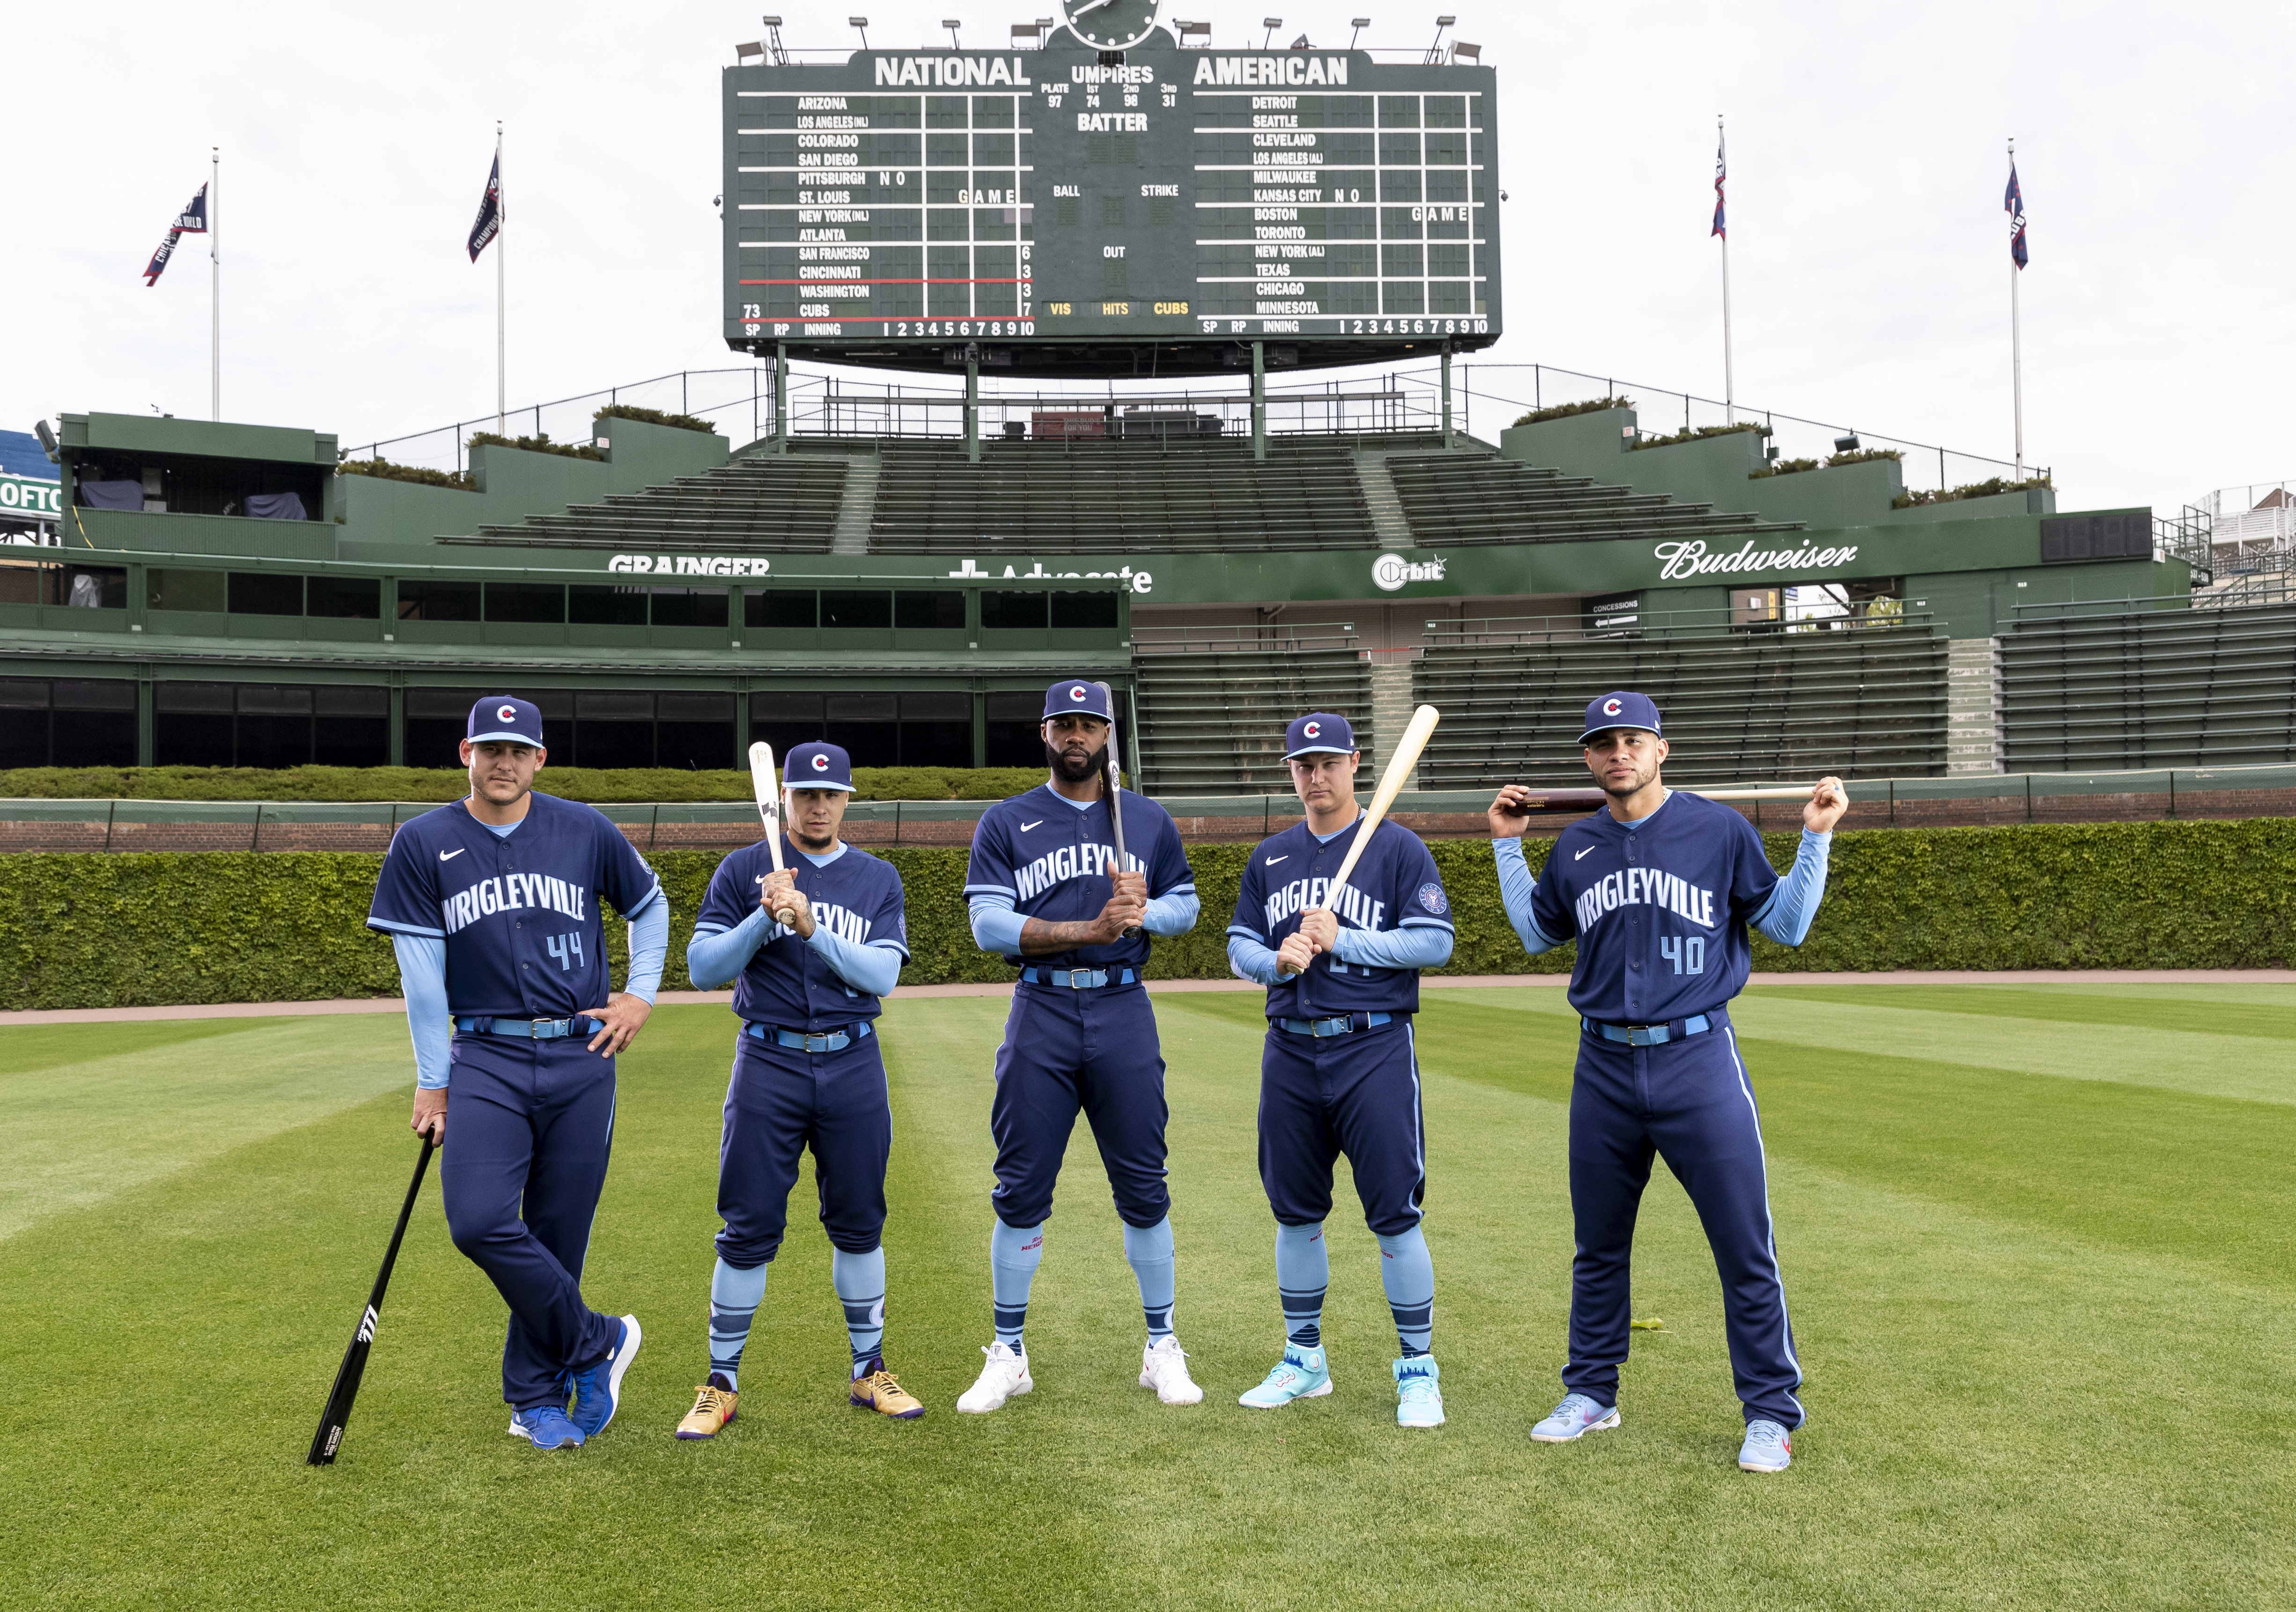 Cubs' Tom Ricketts reveals why 'Wrigleyville' on city connect jersey – NBC  Sports Chicago